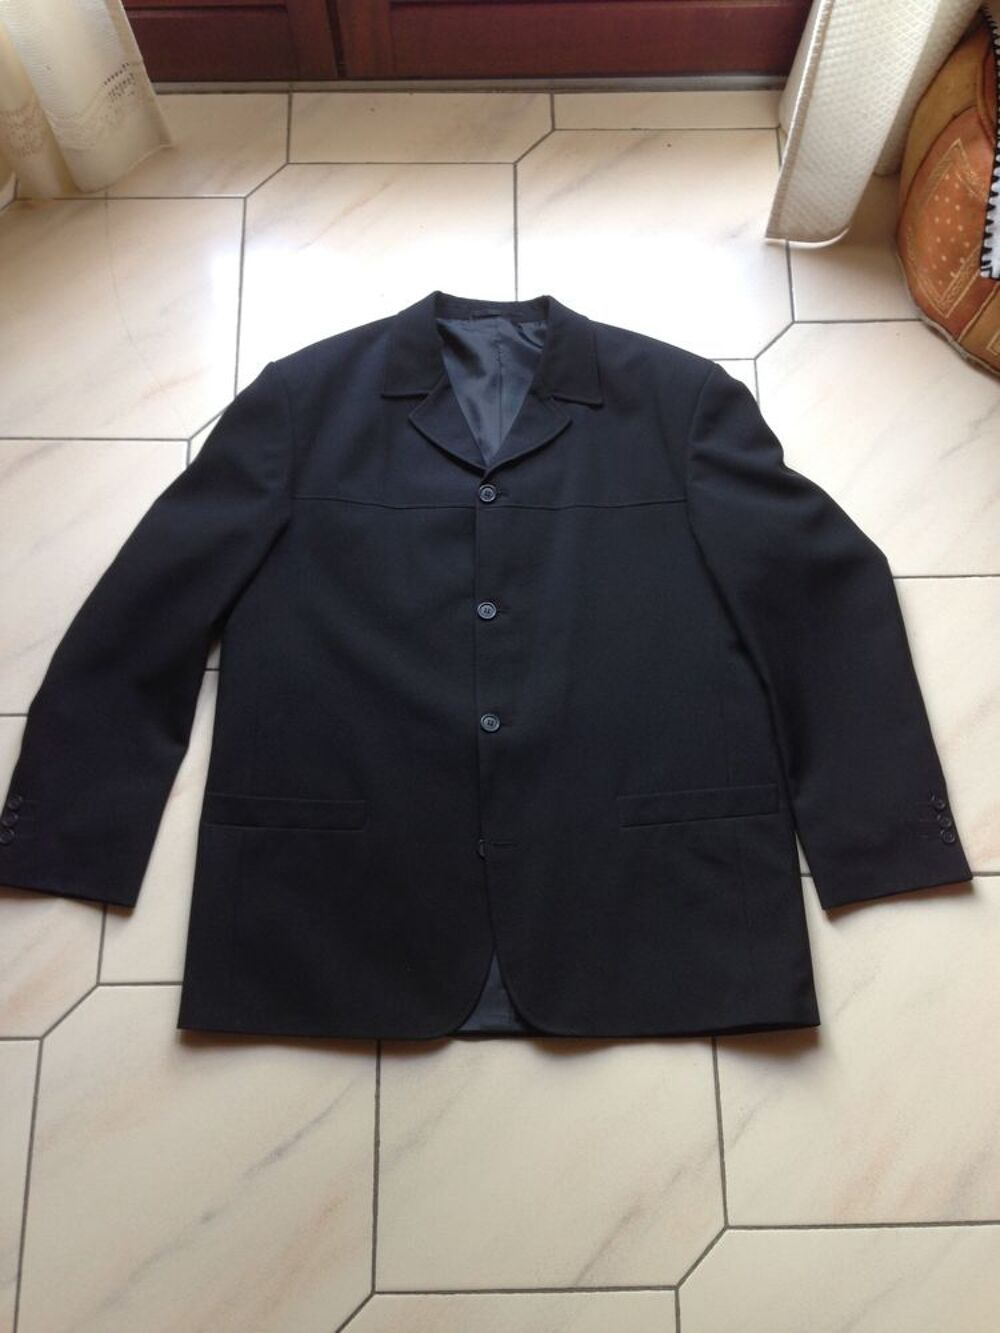 Costume noir 100 % polyester taille 44 Vtements